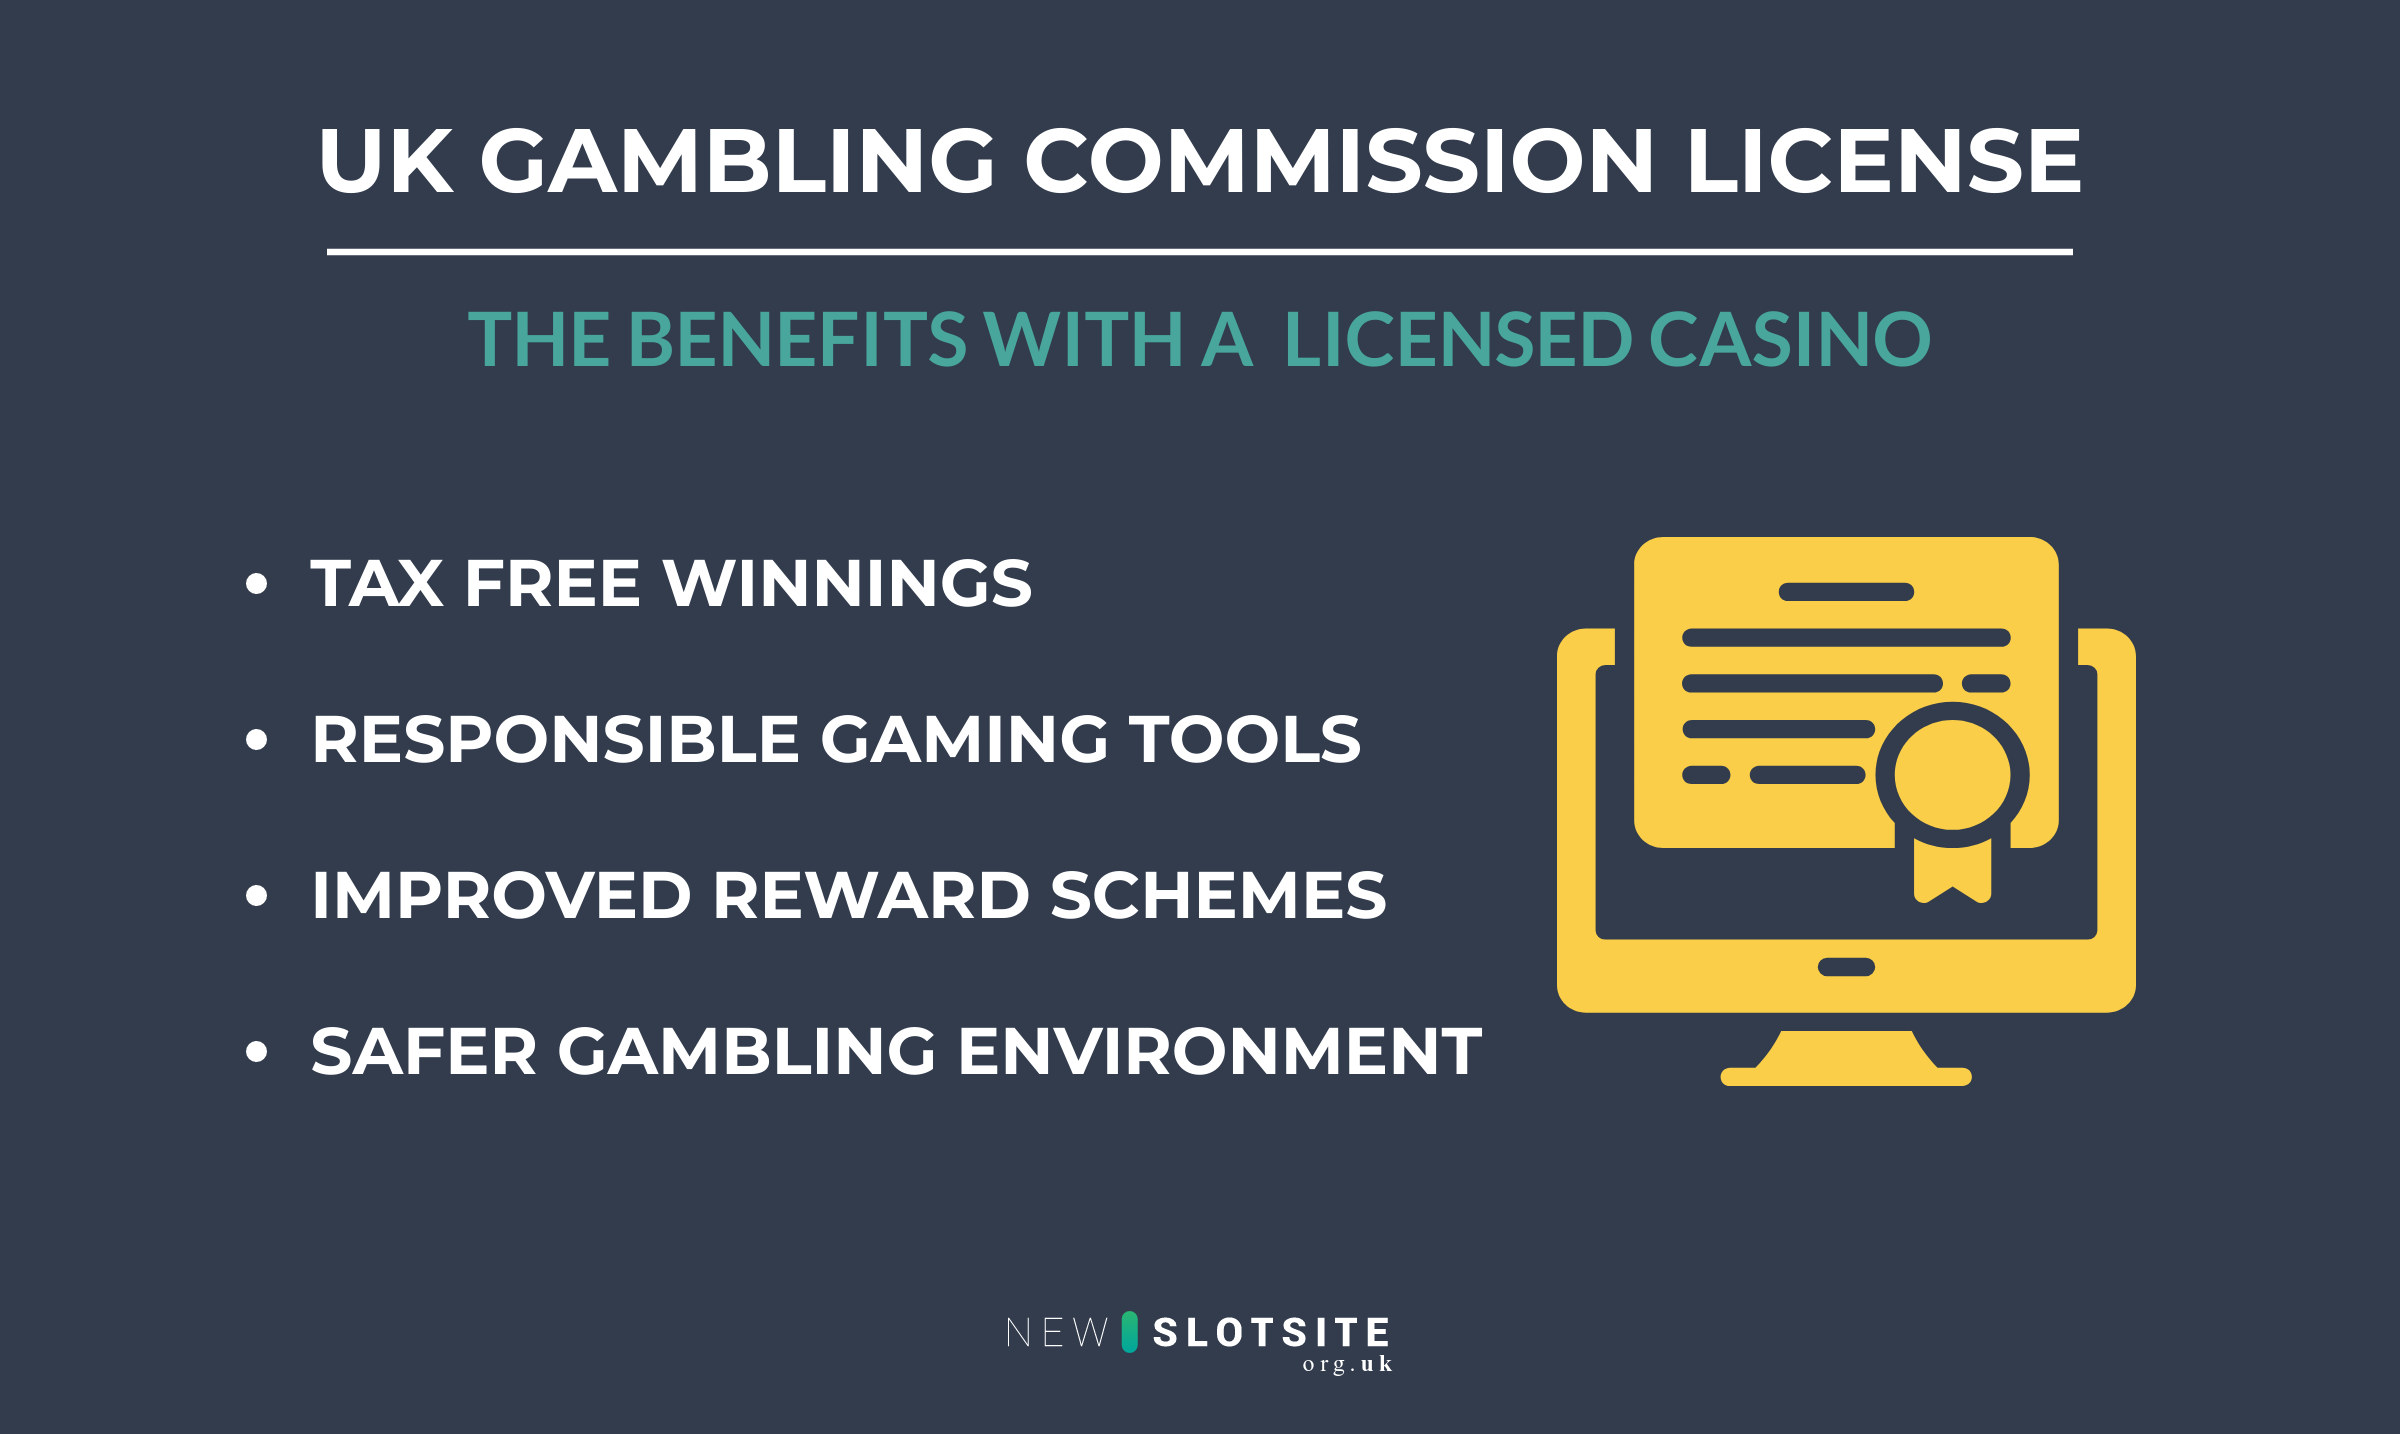 BENEFITS WITH A LICENSED CASINO NEW SLOT SITES UK